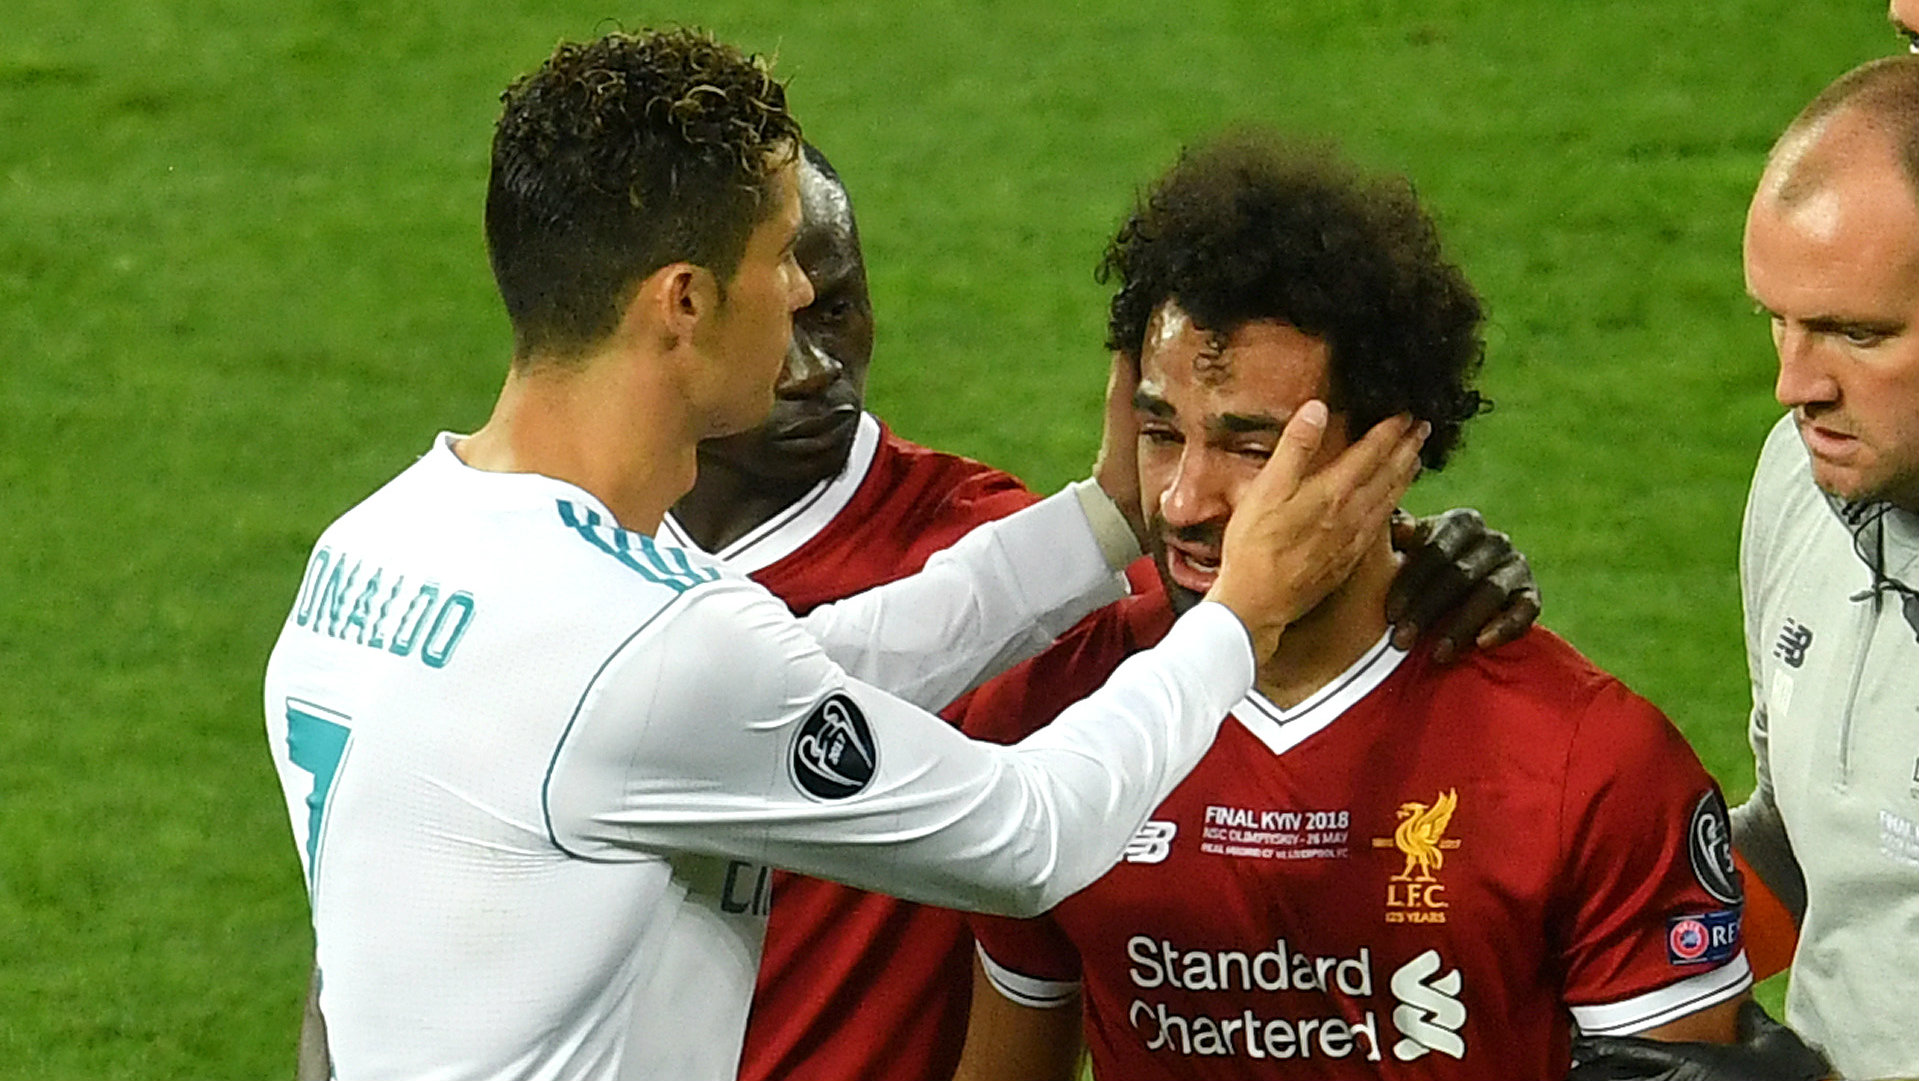 Mohamed Salah statue: Liverpool star matches Cristiano Ronaldo after bizarre statue ...